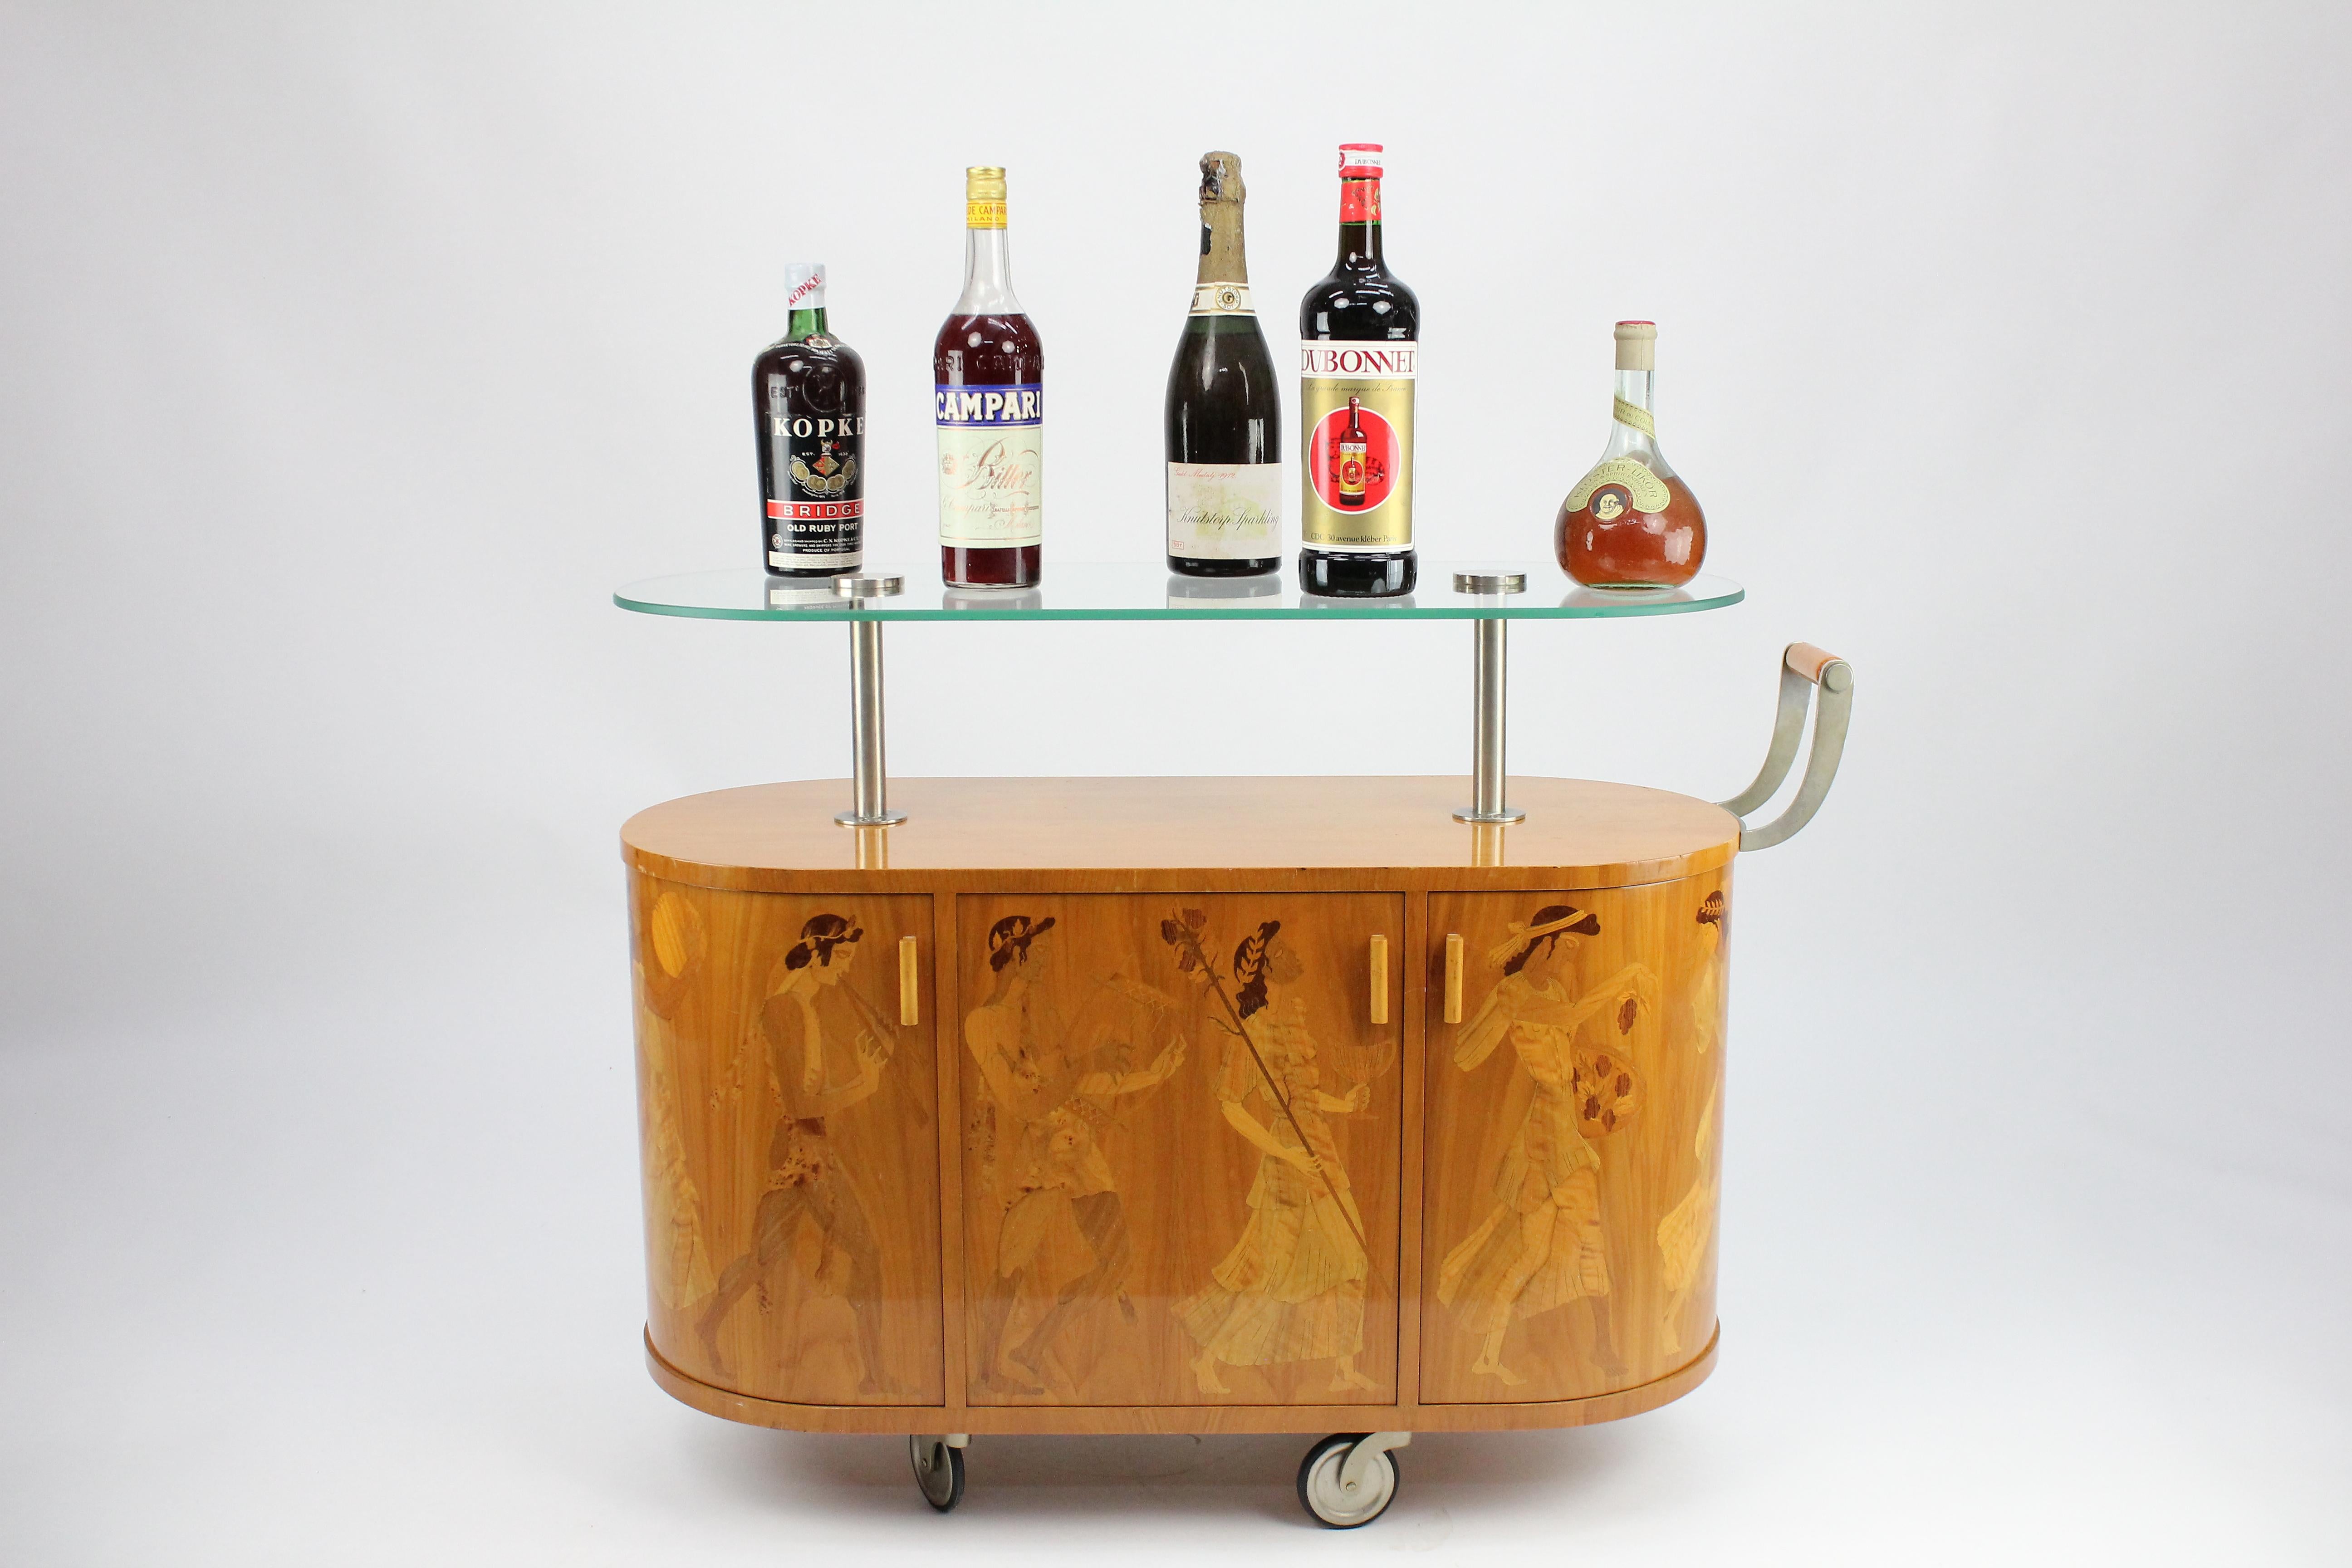 Exceptionell Art Deco bar wagon by Erik Mattsson 1939 for Mjölby Intarsia, Sweden.

The bar wagon or bar cart was named 